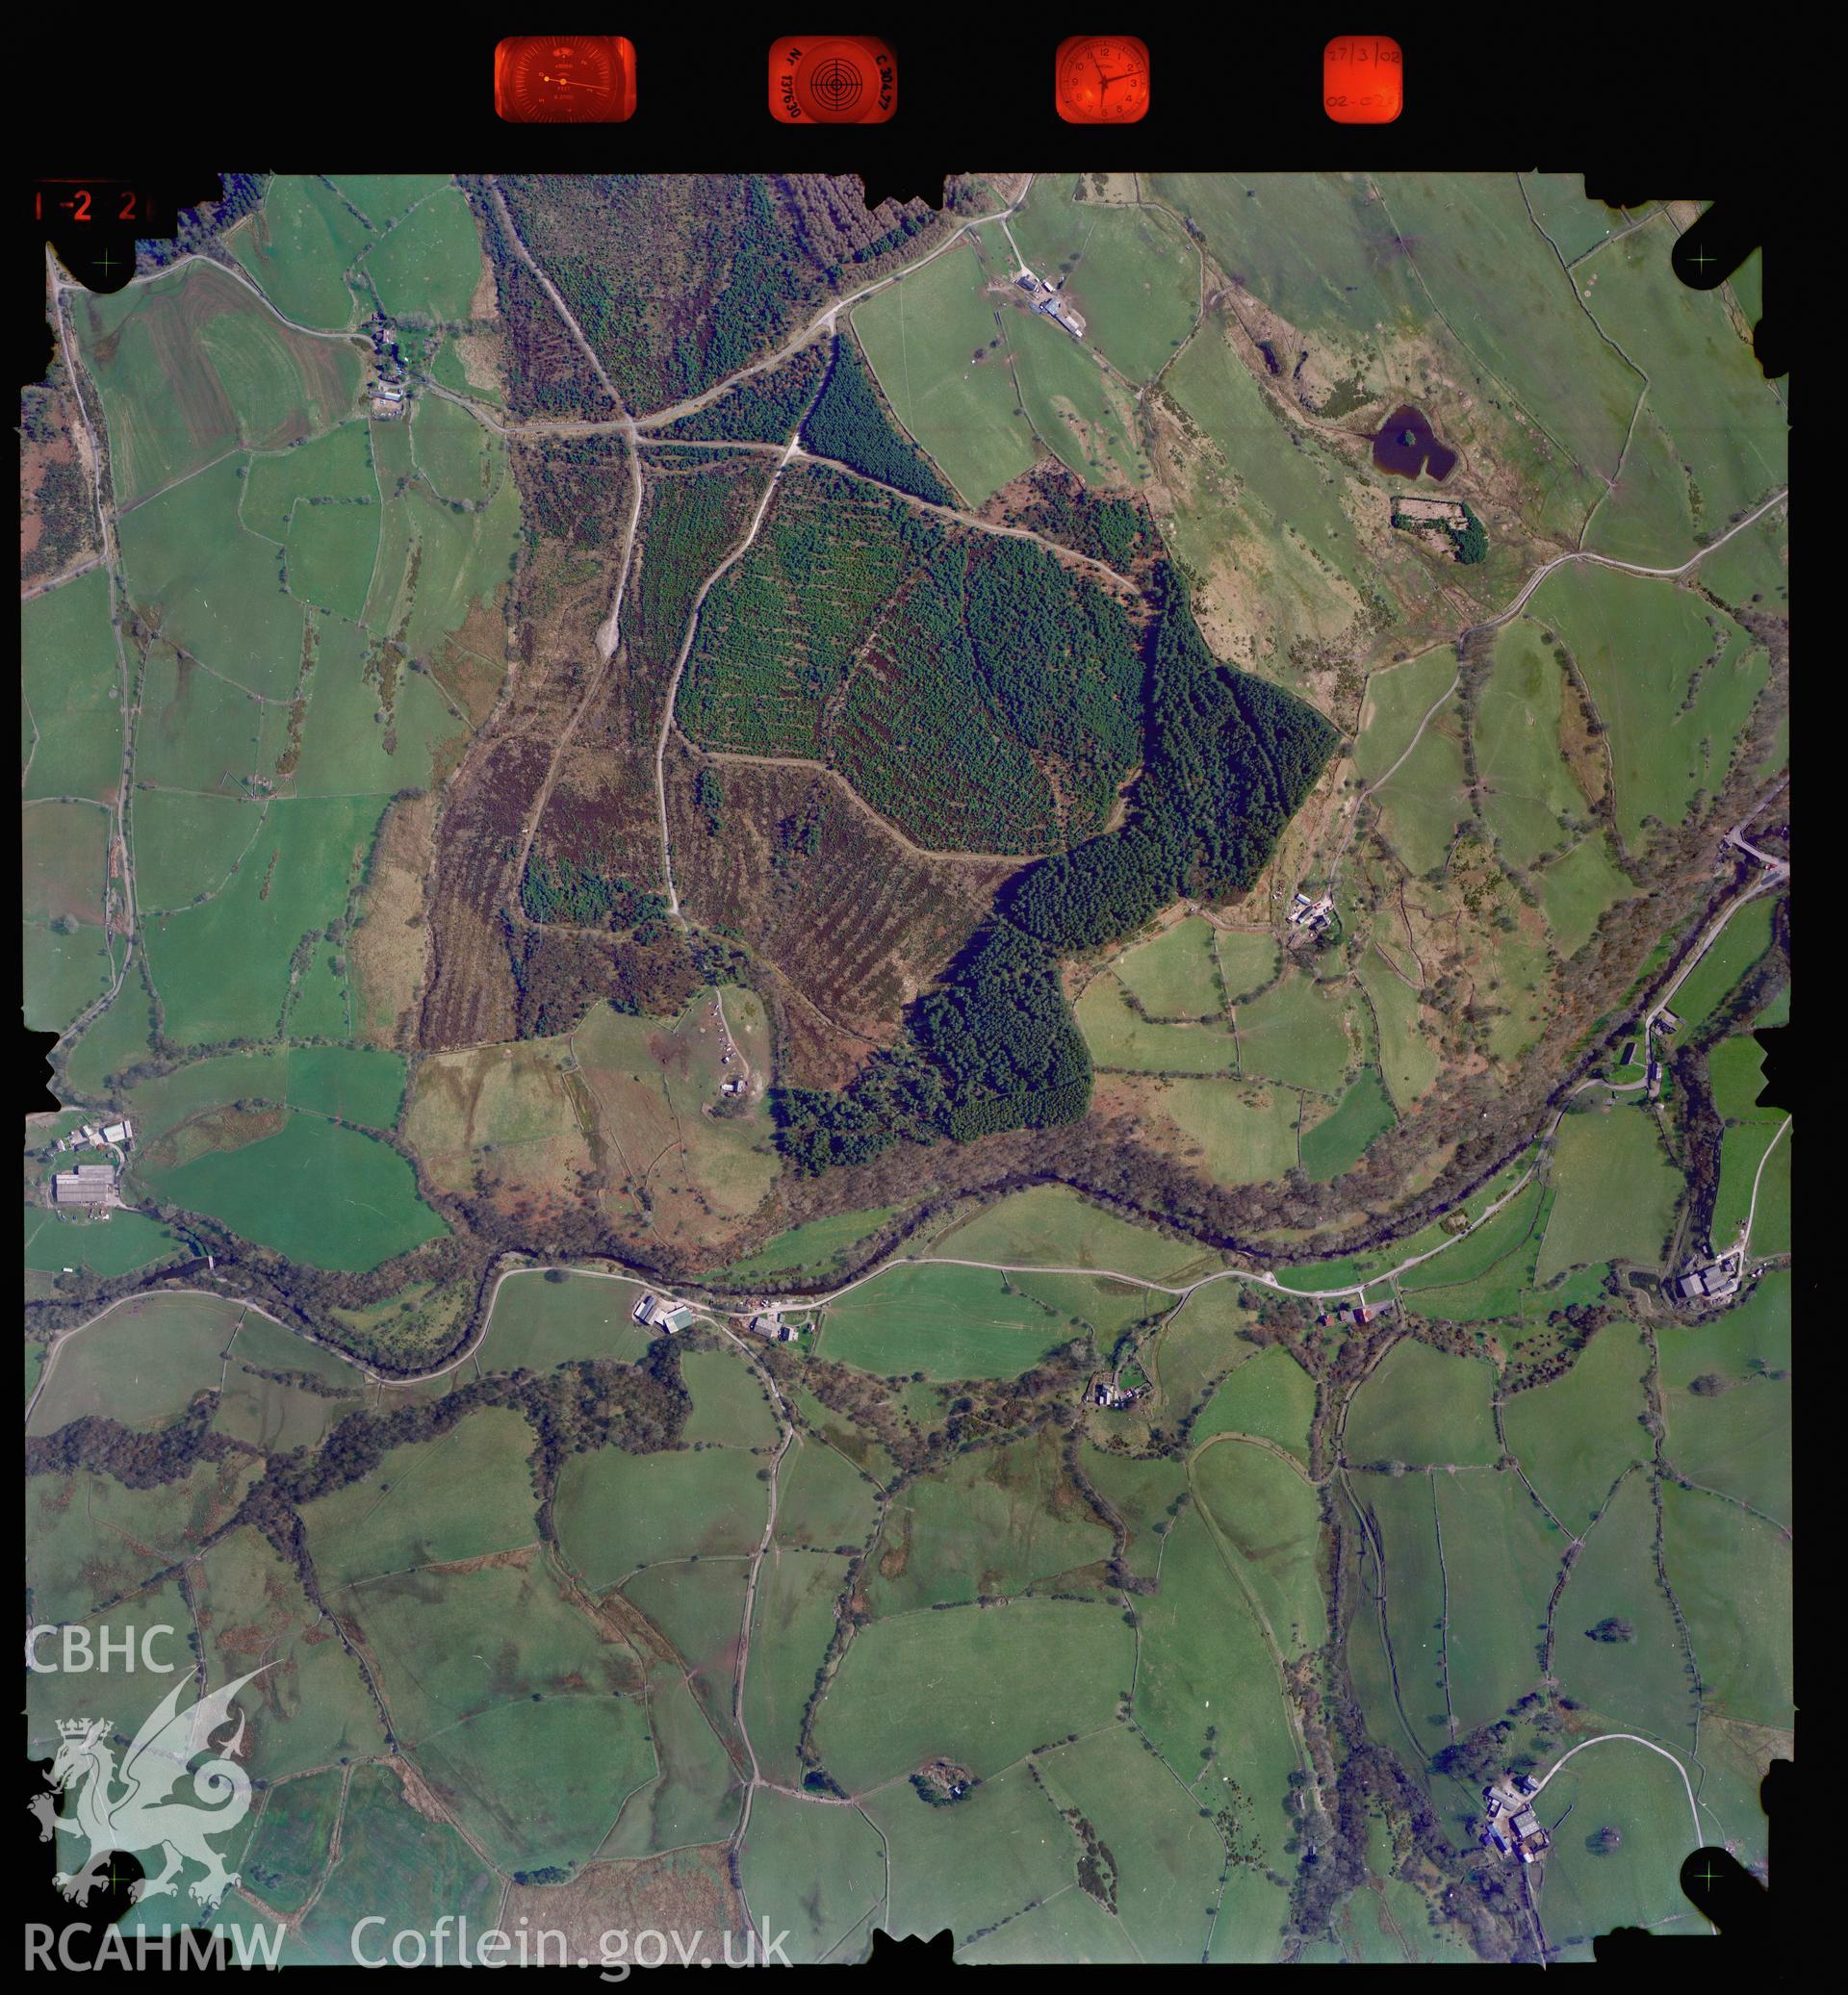 Digitized copy of a colour aerial photograph showing the Llansawel  area, taken by Ordnance Survey, 2002.